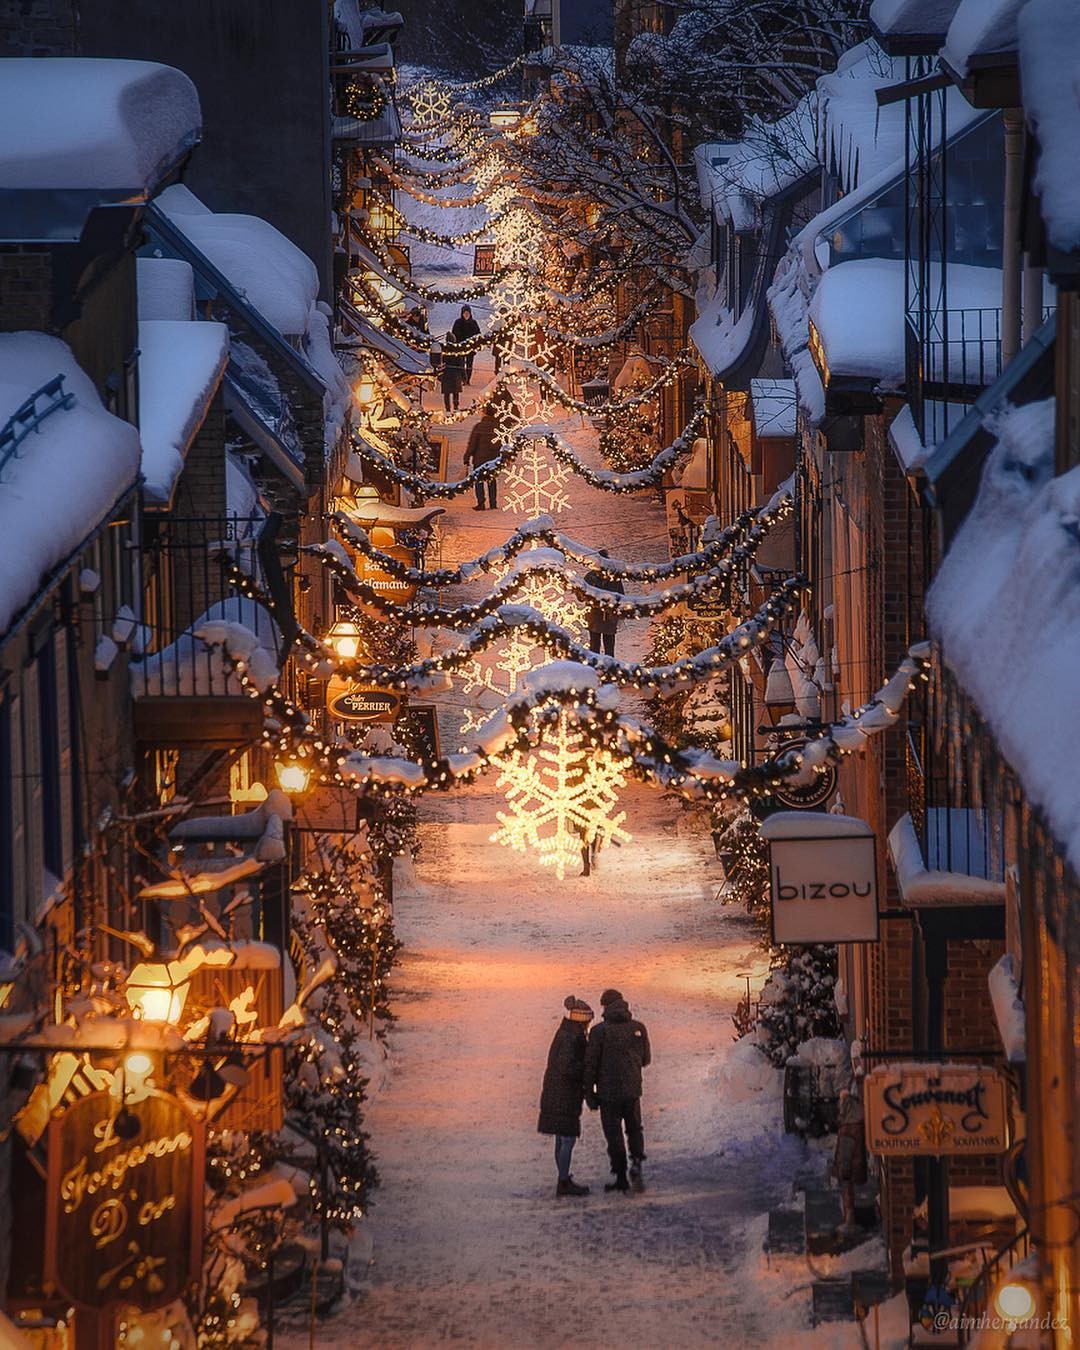 4. Exploring the Stunning Decorations and Lights in Old Quebec: